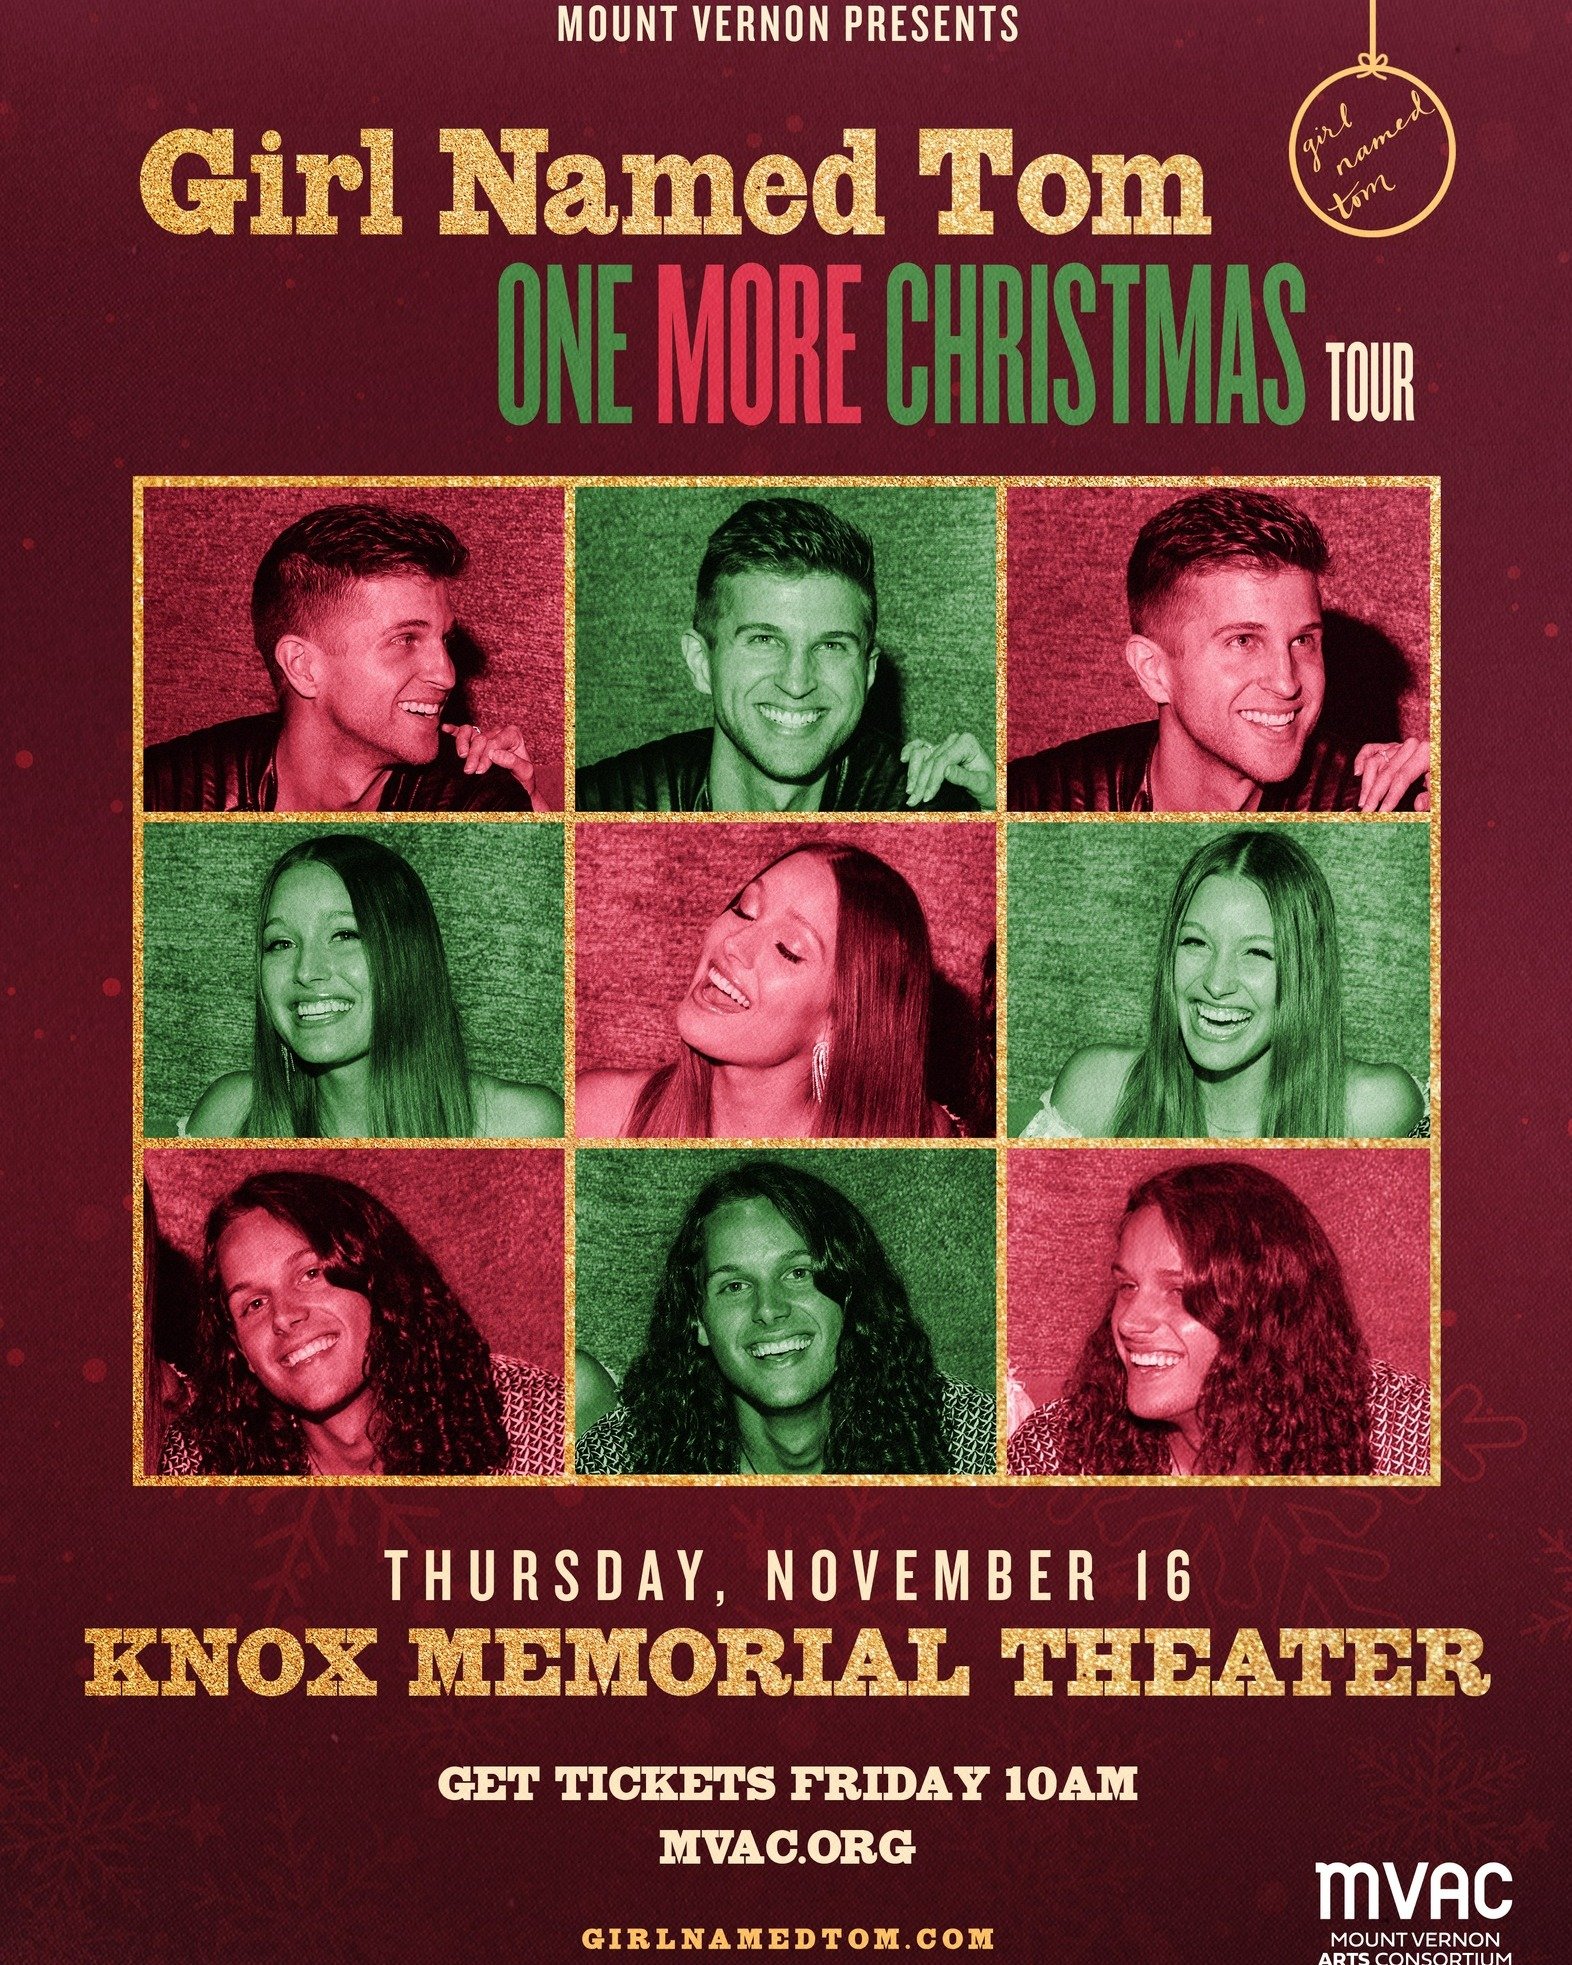 Just Announced!
Girl Named Tom: One More Christmas Tour ~ Thursday, November 16 at 8:00pm
Don't miss the sibling fan-favorite finalists of NBC's The Voice as they bring their spectacular One More Christmas tour to the Knox Memorial to kick off the ho